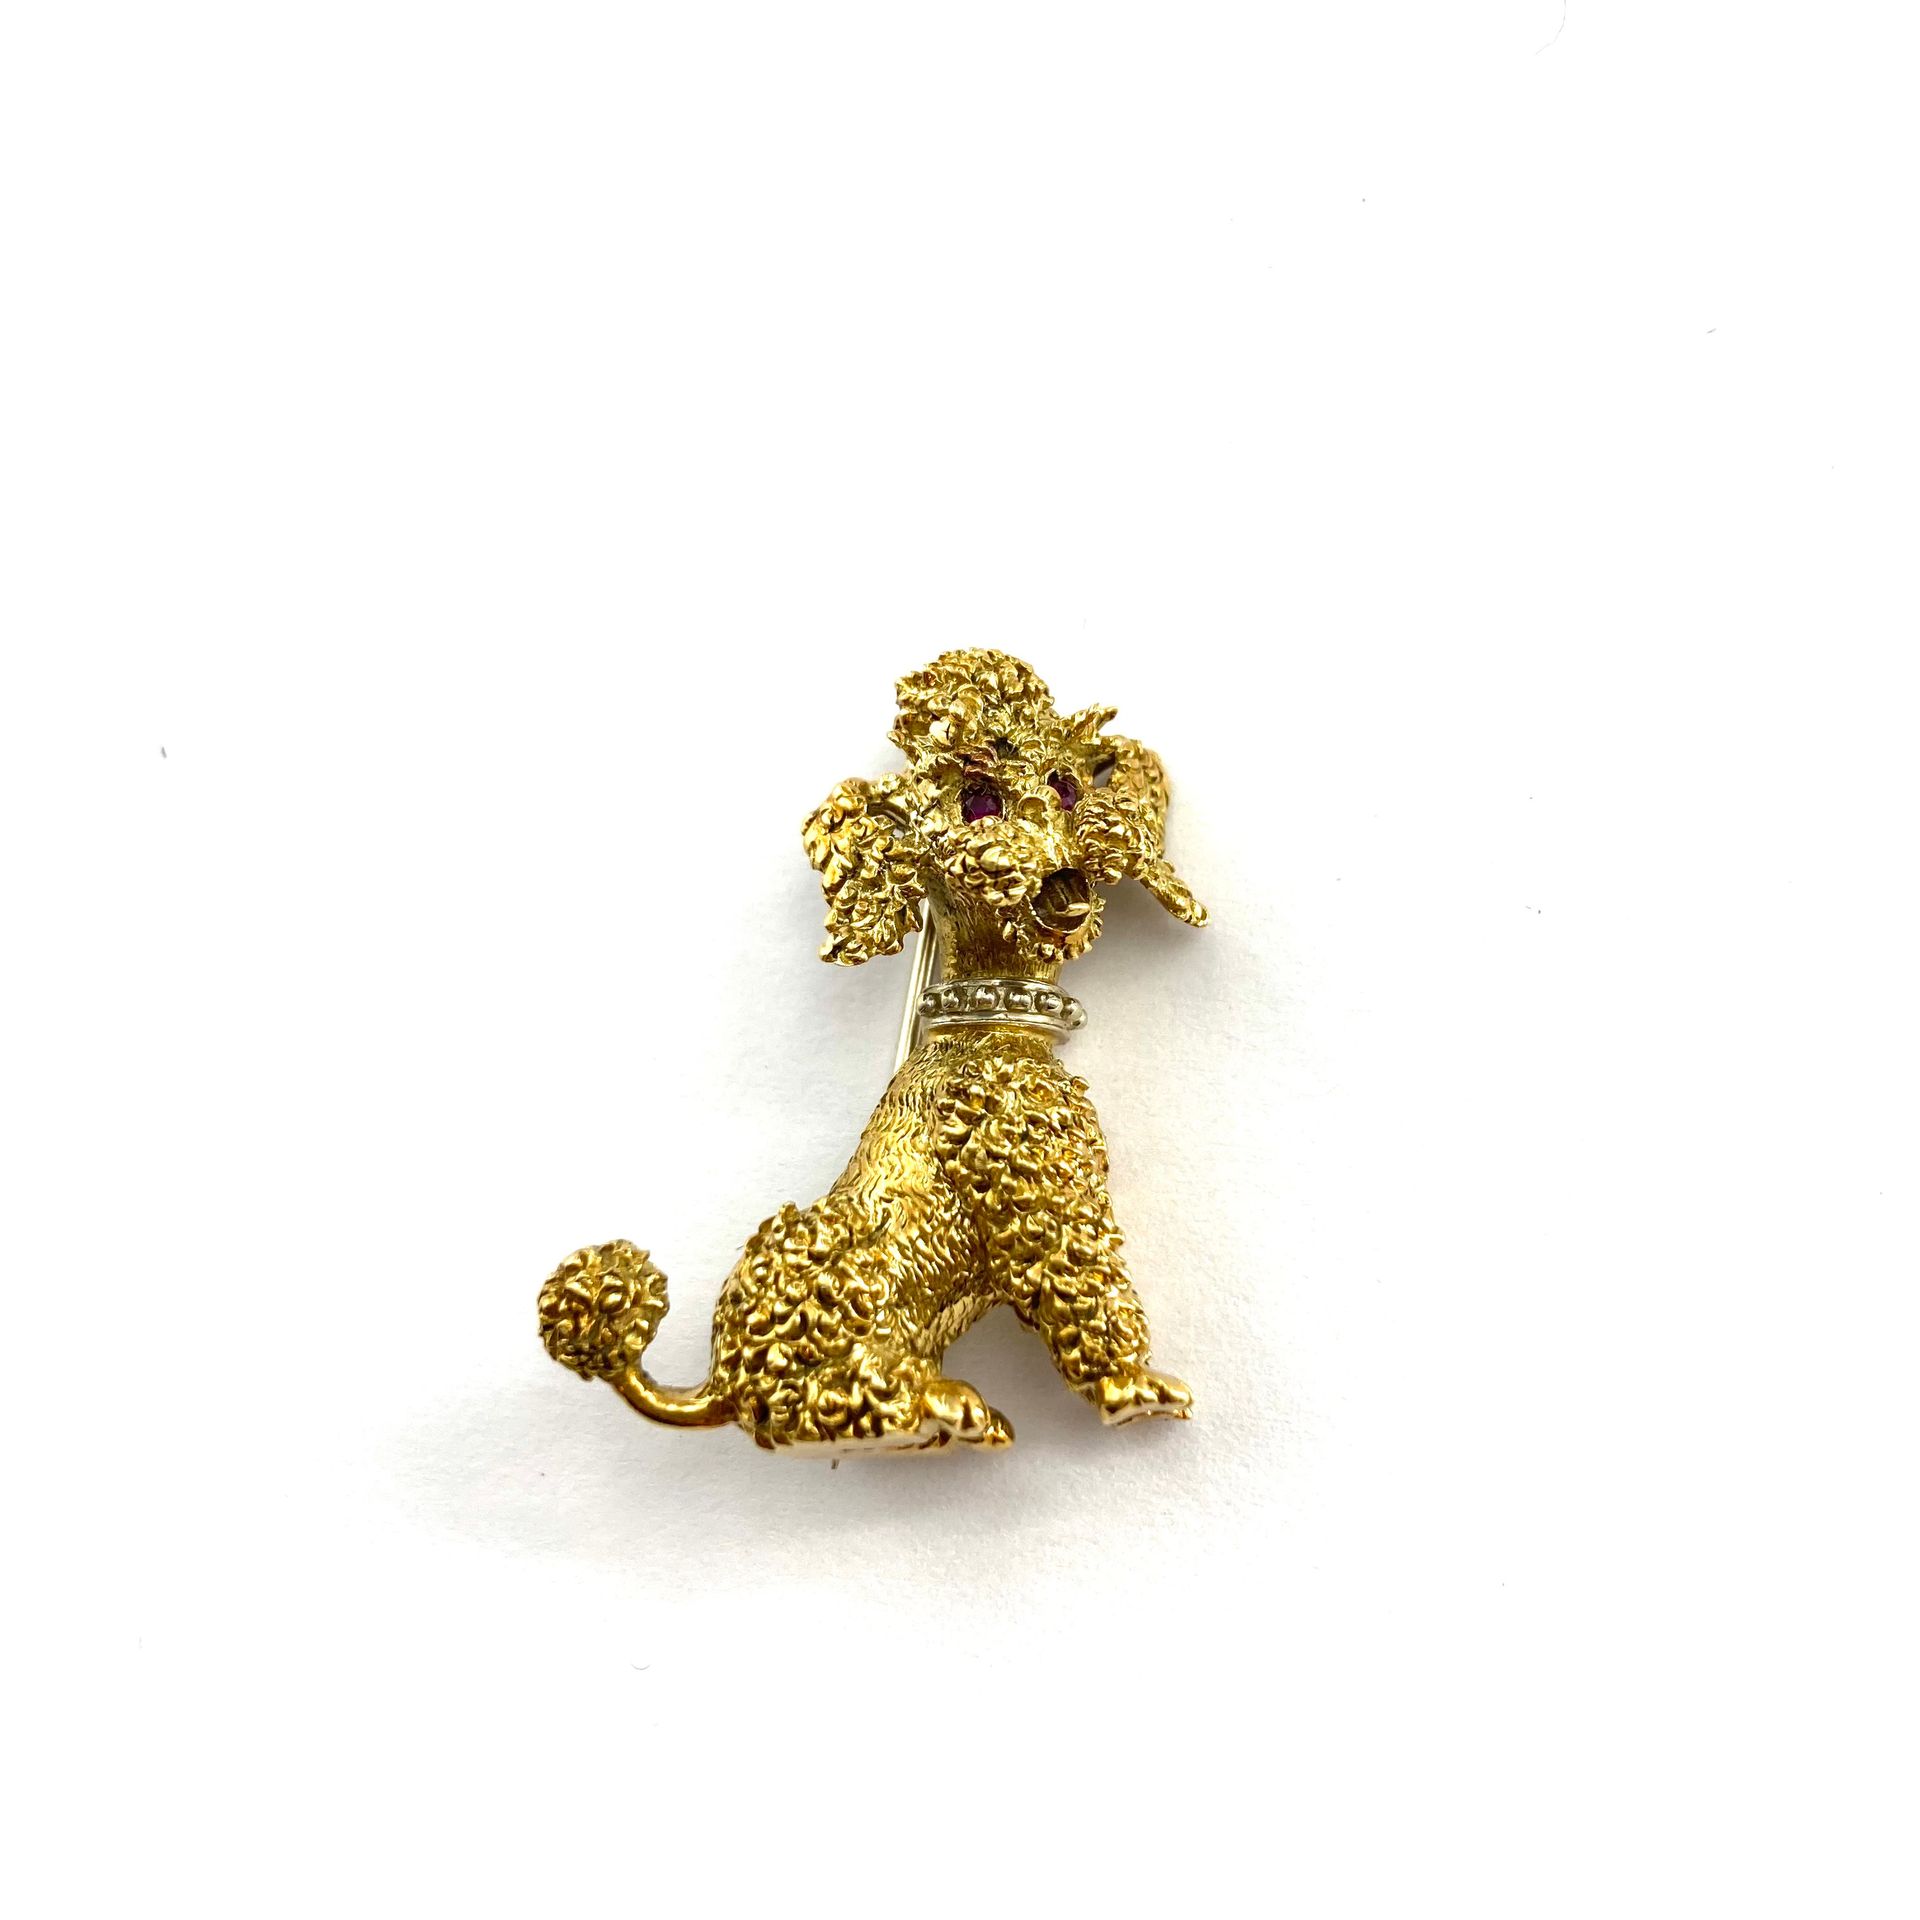 Null Poodle brooch in 18k (750) yellow gold.

Gross weight: 10.40 g.